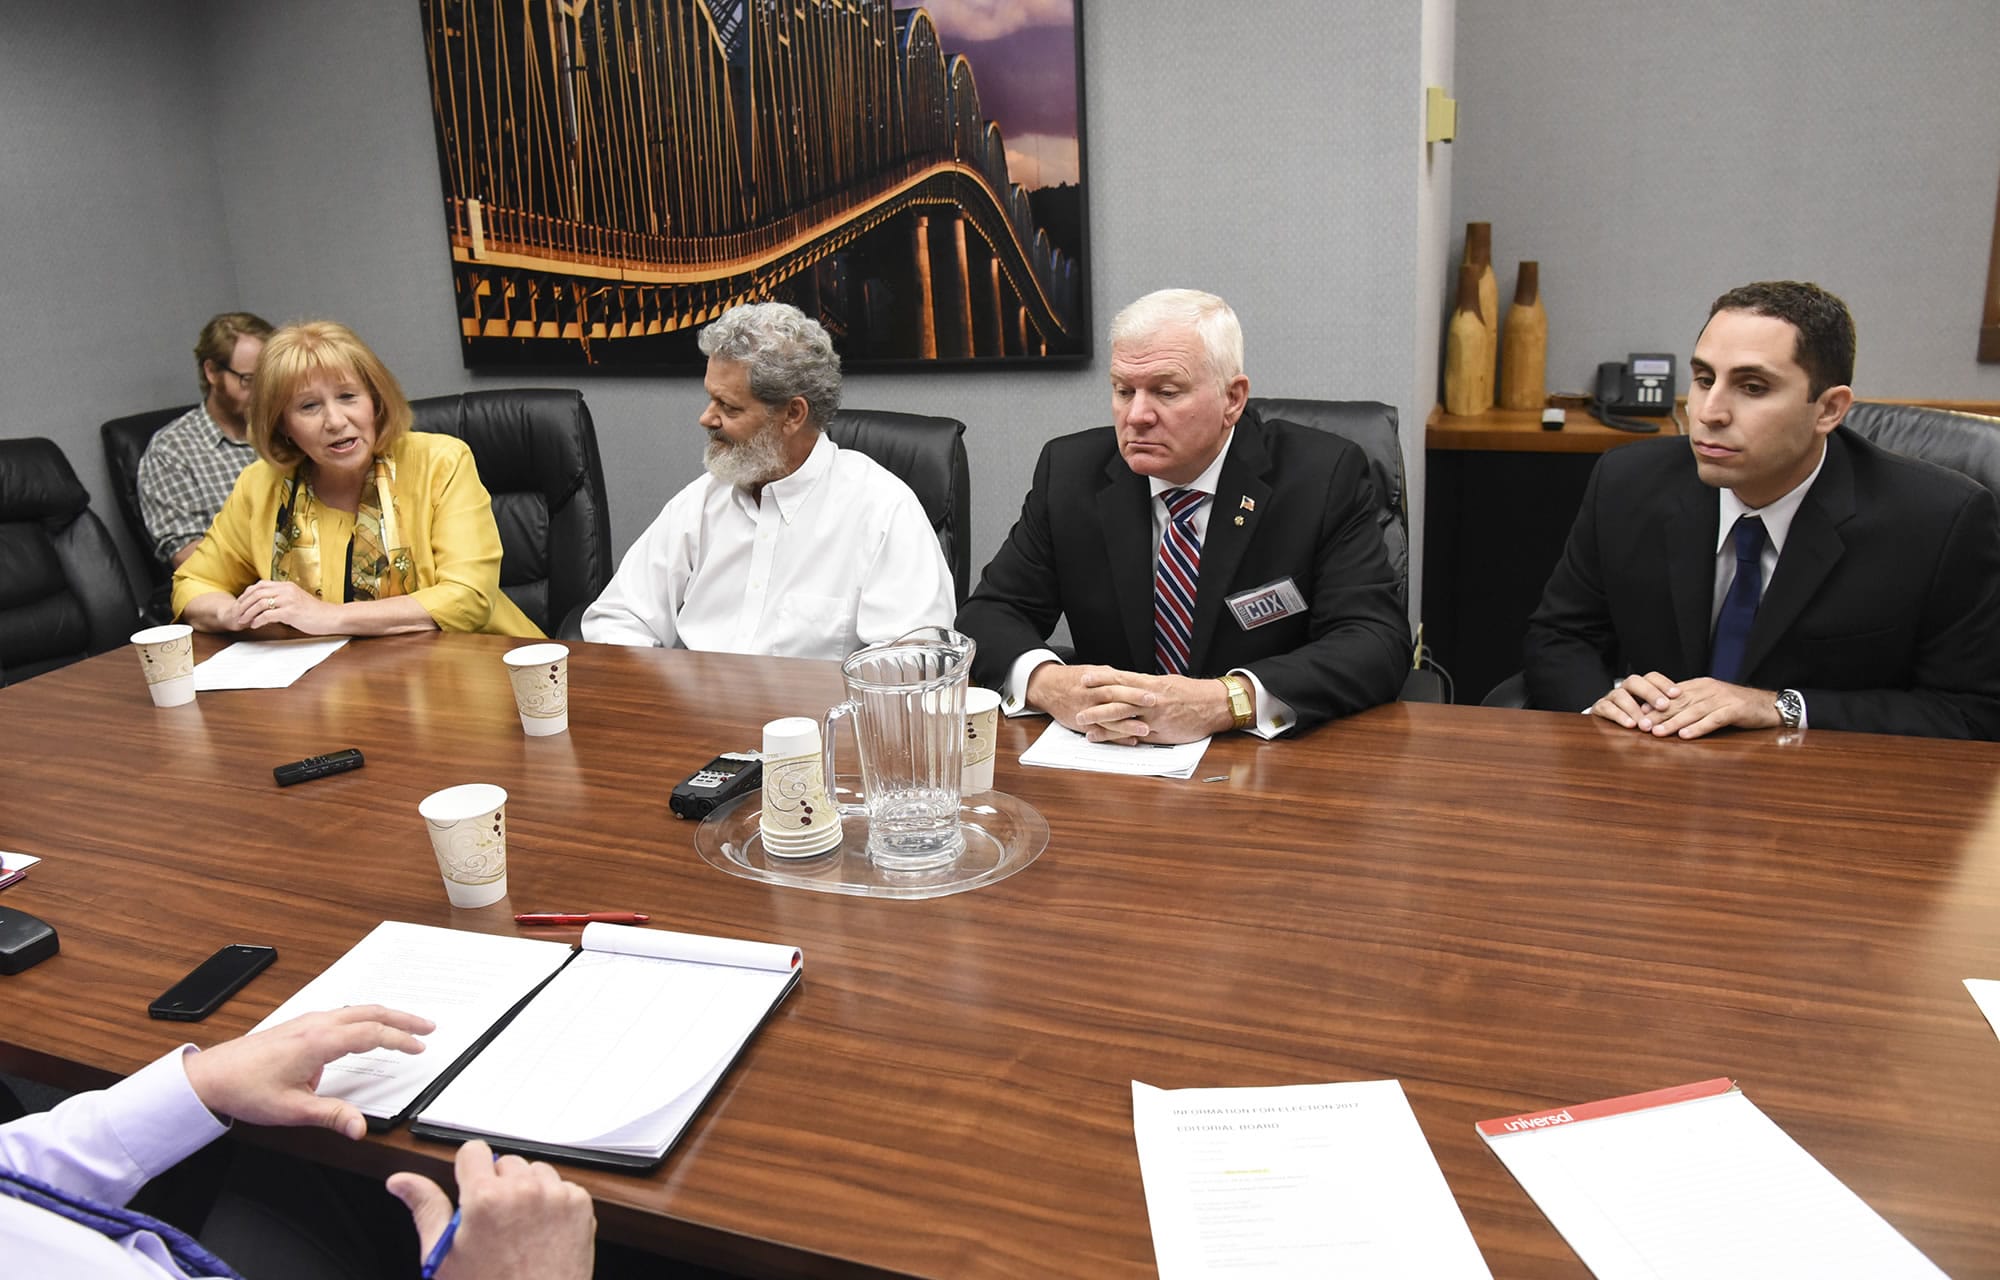 Candidates for Vancouver mayor, from left, Anne McEnerny-Ogle, Greg Henderson, Steven Cox and Adam Hamide meet with The Columbian's Editorial Board on July 3. Candidate John Carroll didn't respond to The Columbian's invitation.